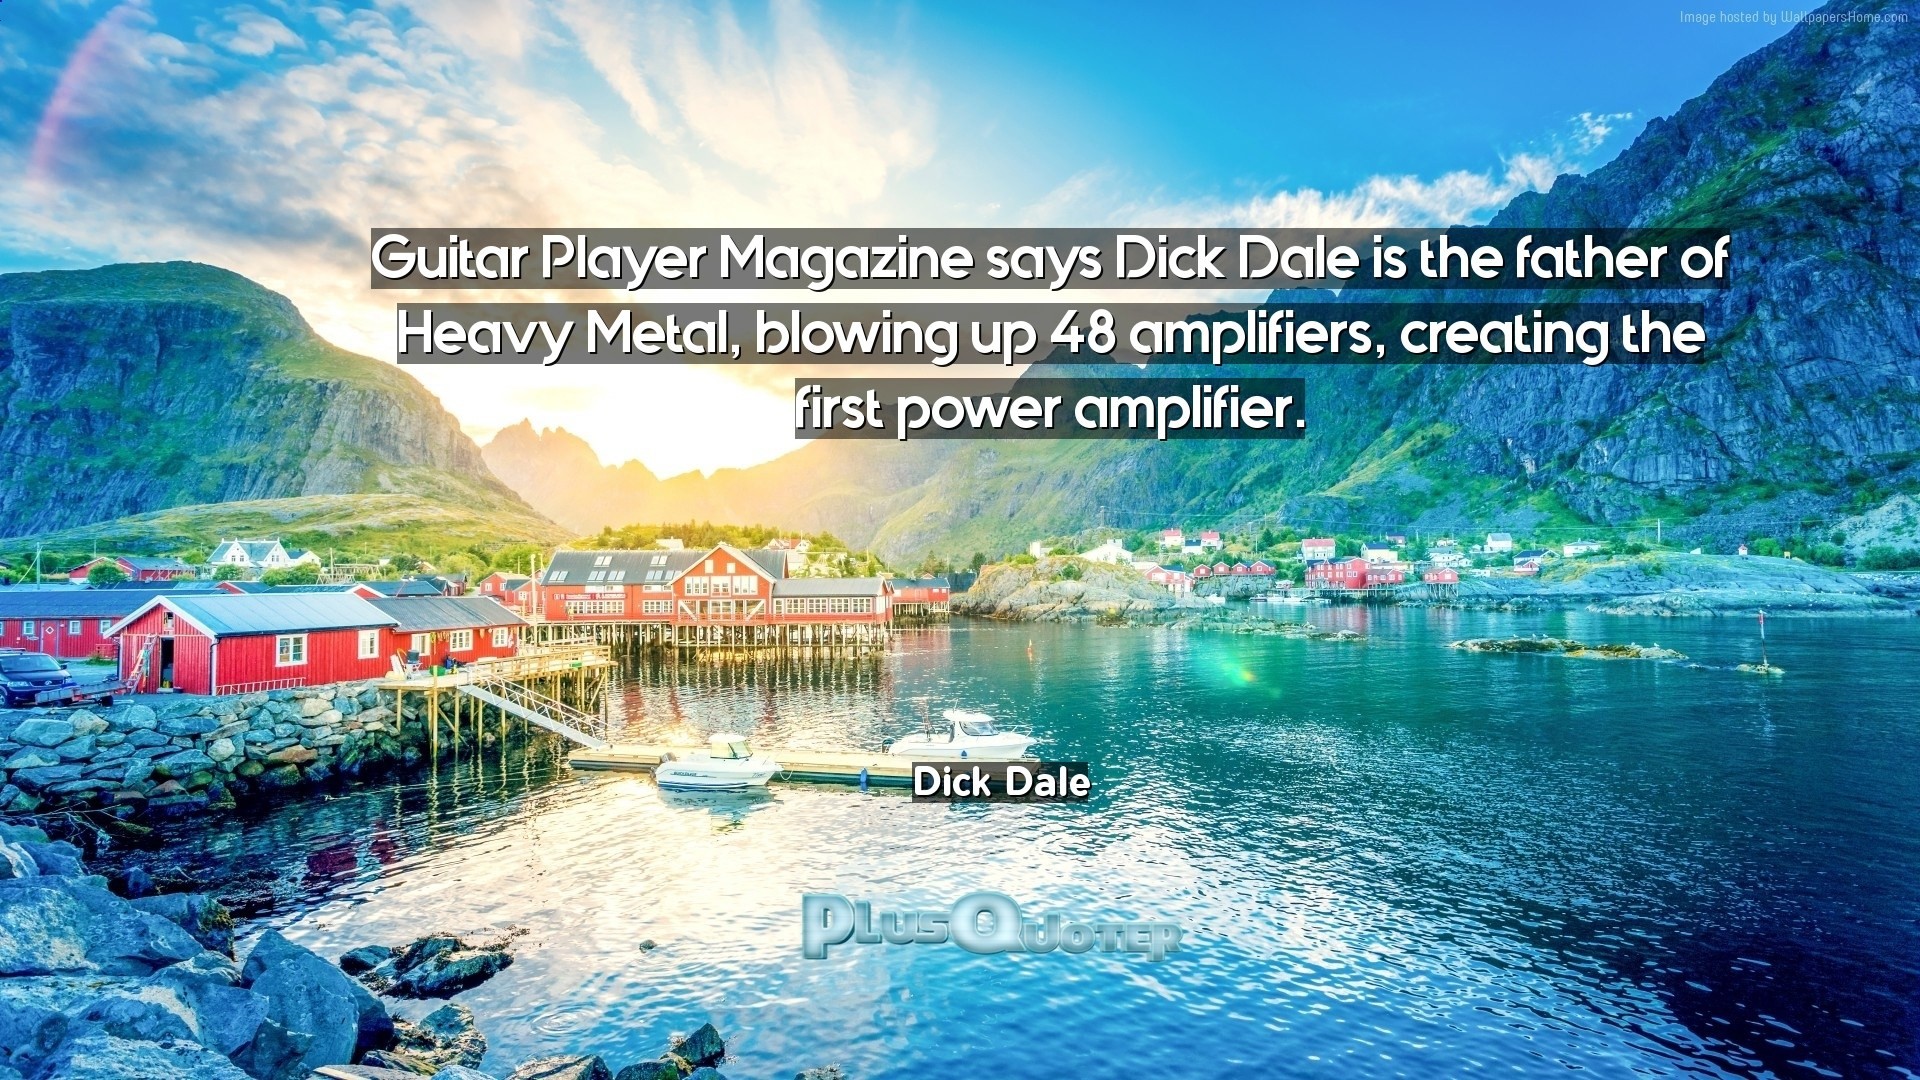 1920x1080 Download Wallpaper with inspirational Quotes- "Guitar Player Magazine says  Dick Dale is the father